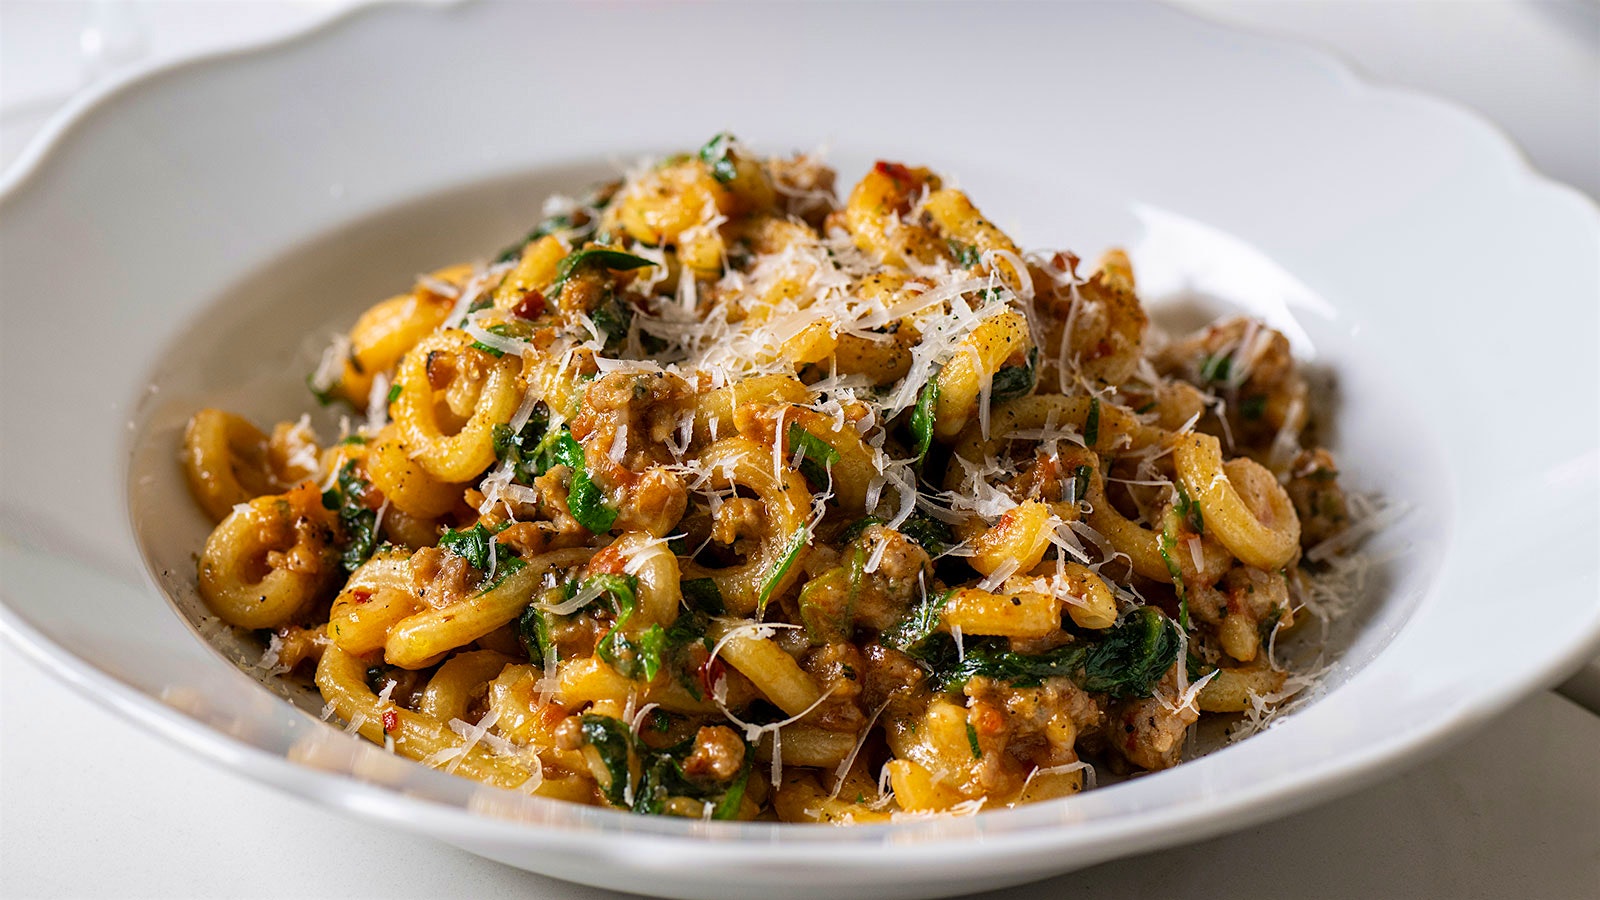  A plate of gramigna pasta with spicy sausage, spinach and Grana Padano cheese